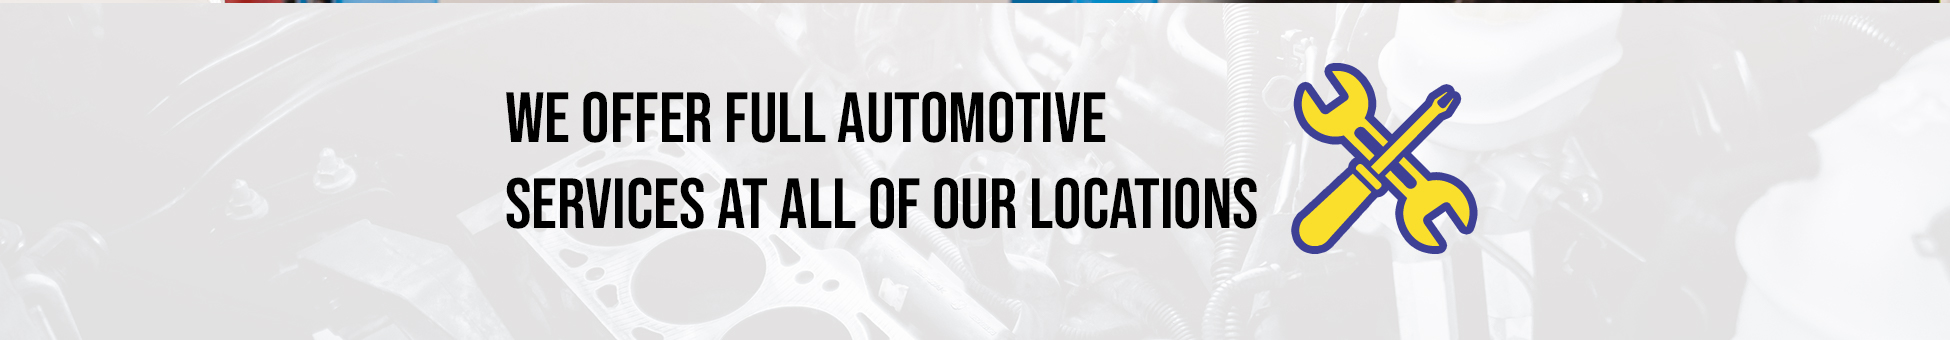 We offer full automotive services